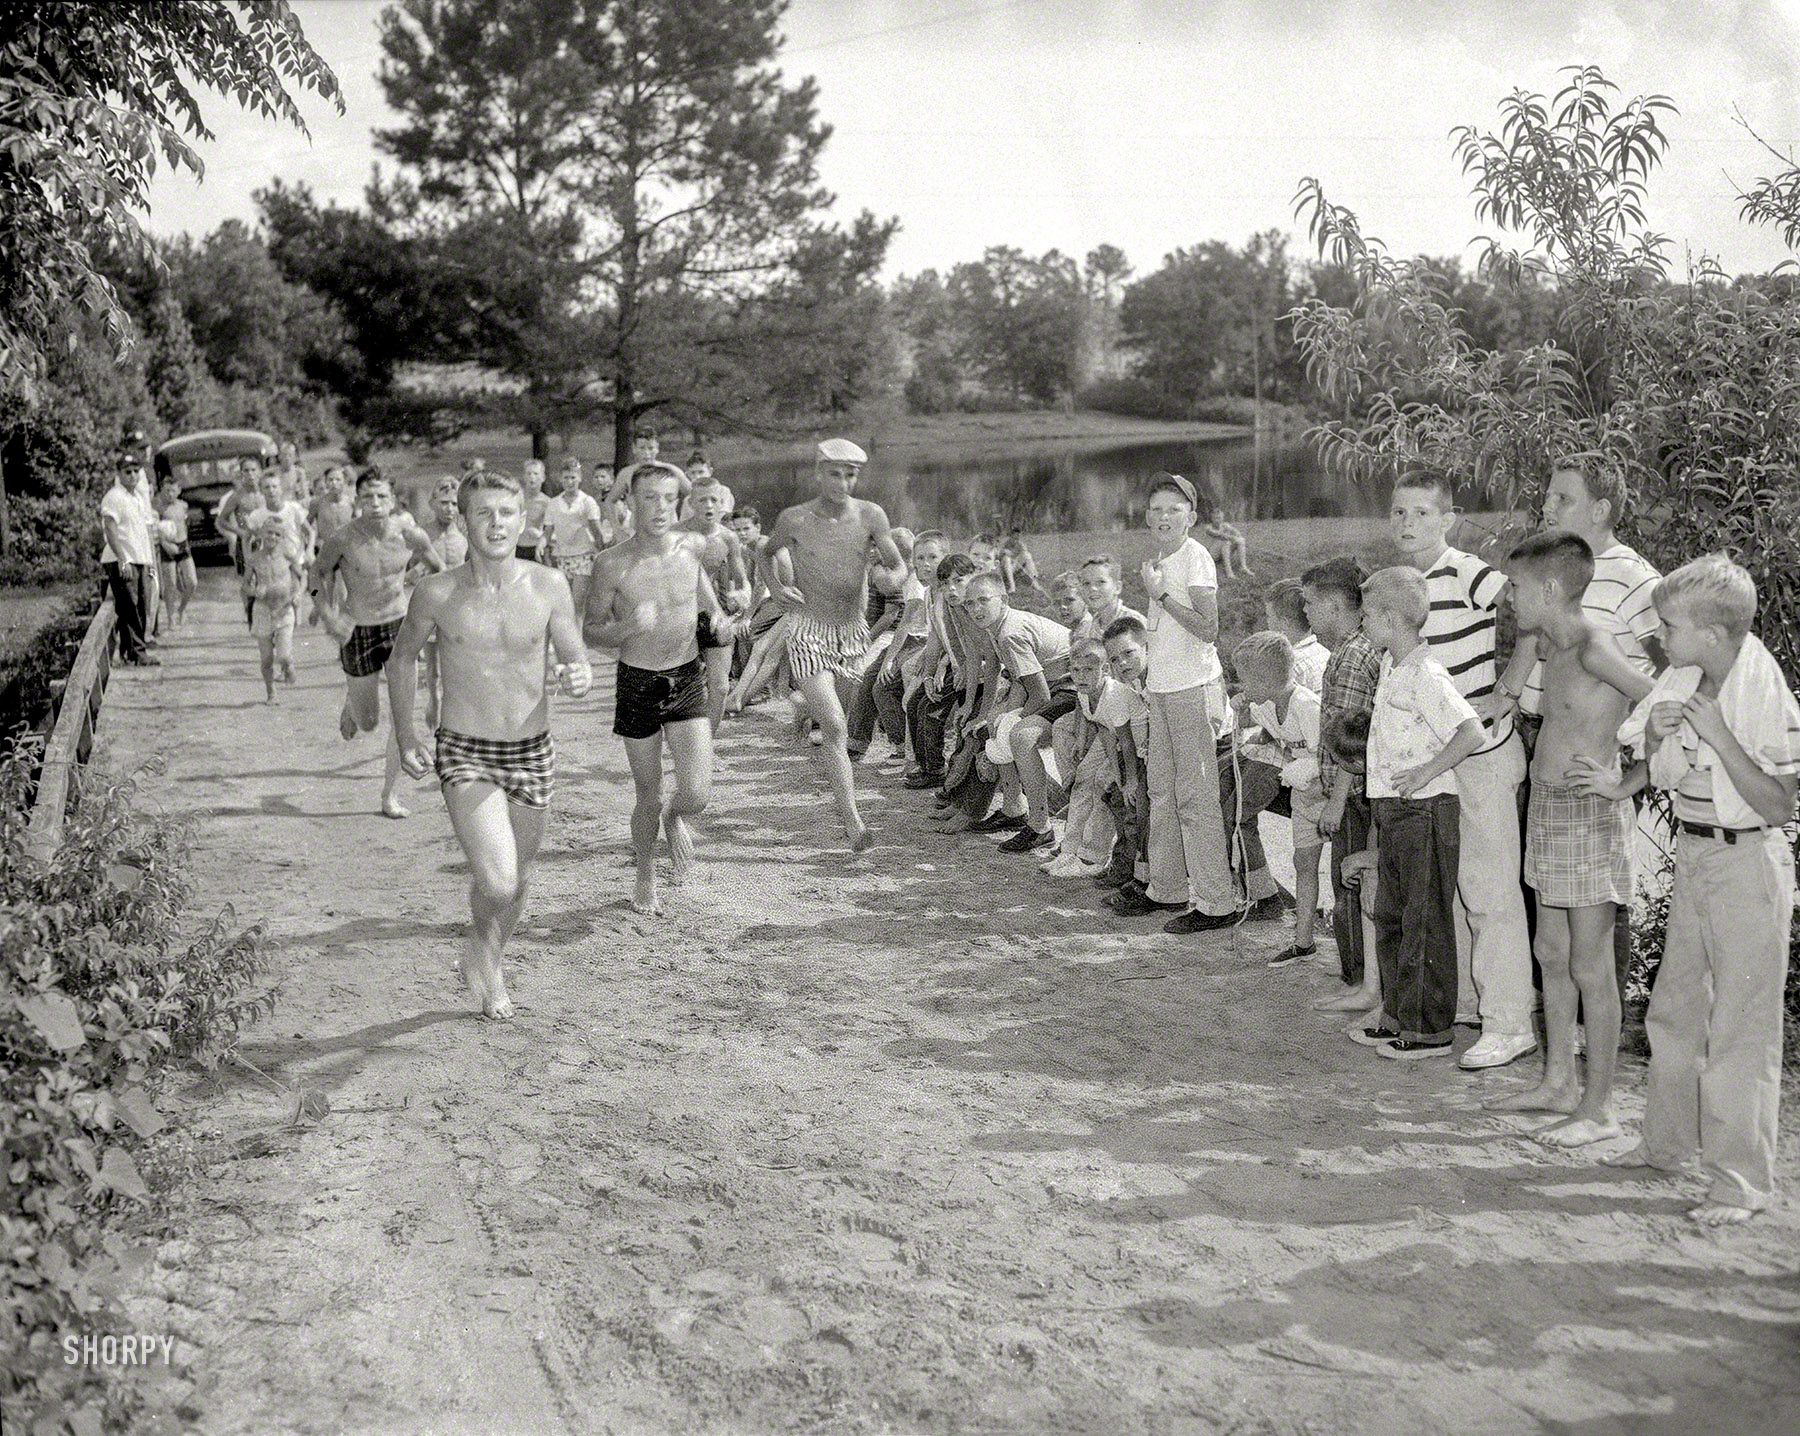 Columbus, Georgia, circa 1959. "Swim camp. Boys at park." Making a break from the bus. 4x5 acetate negative from the News archive. View full size.